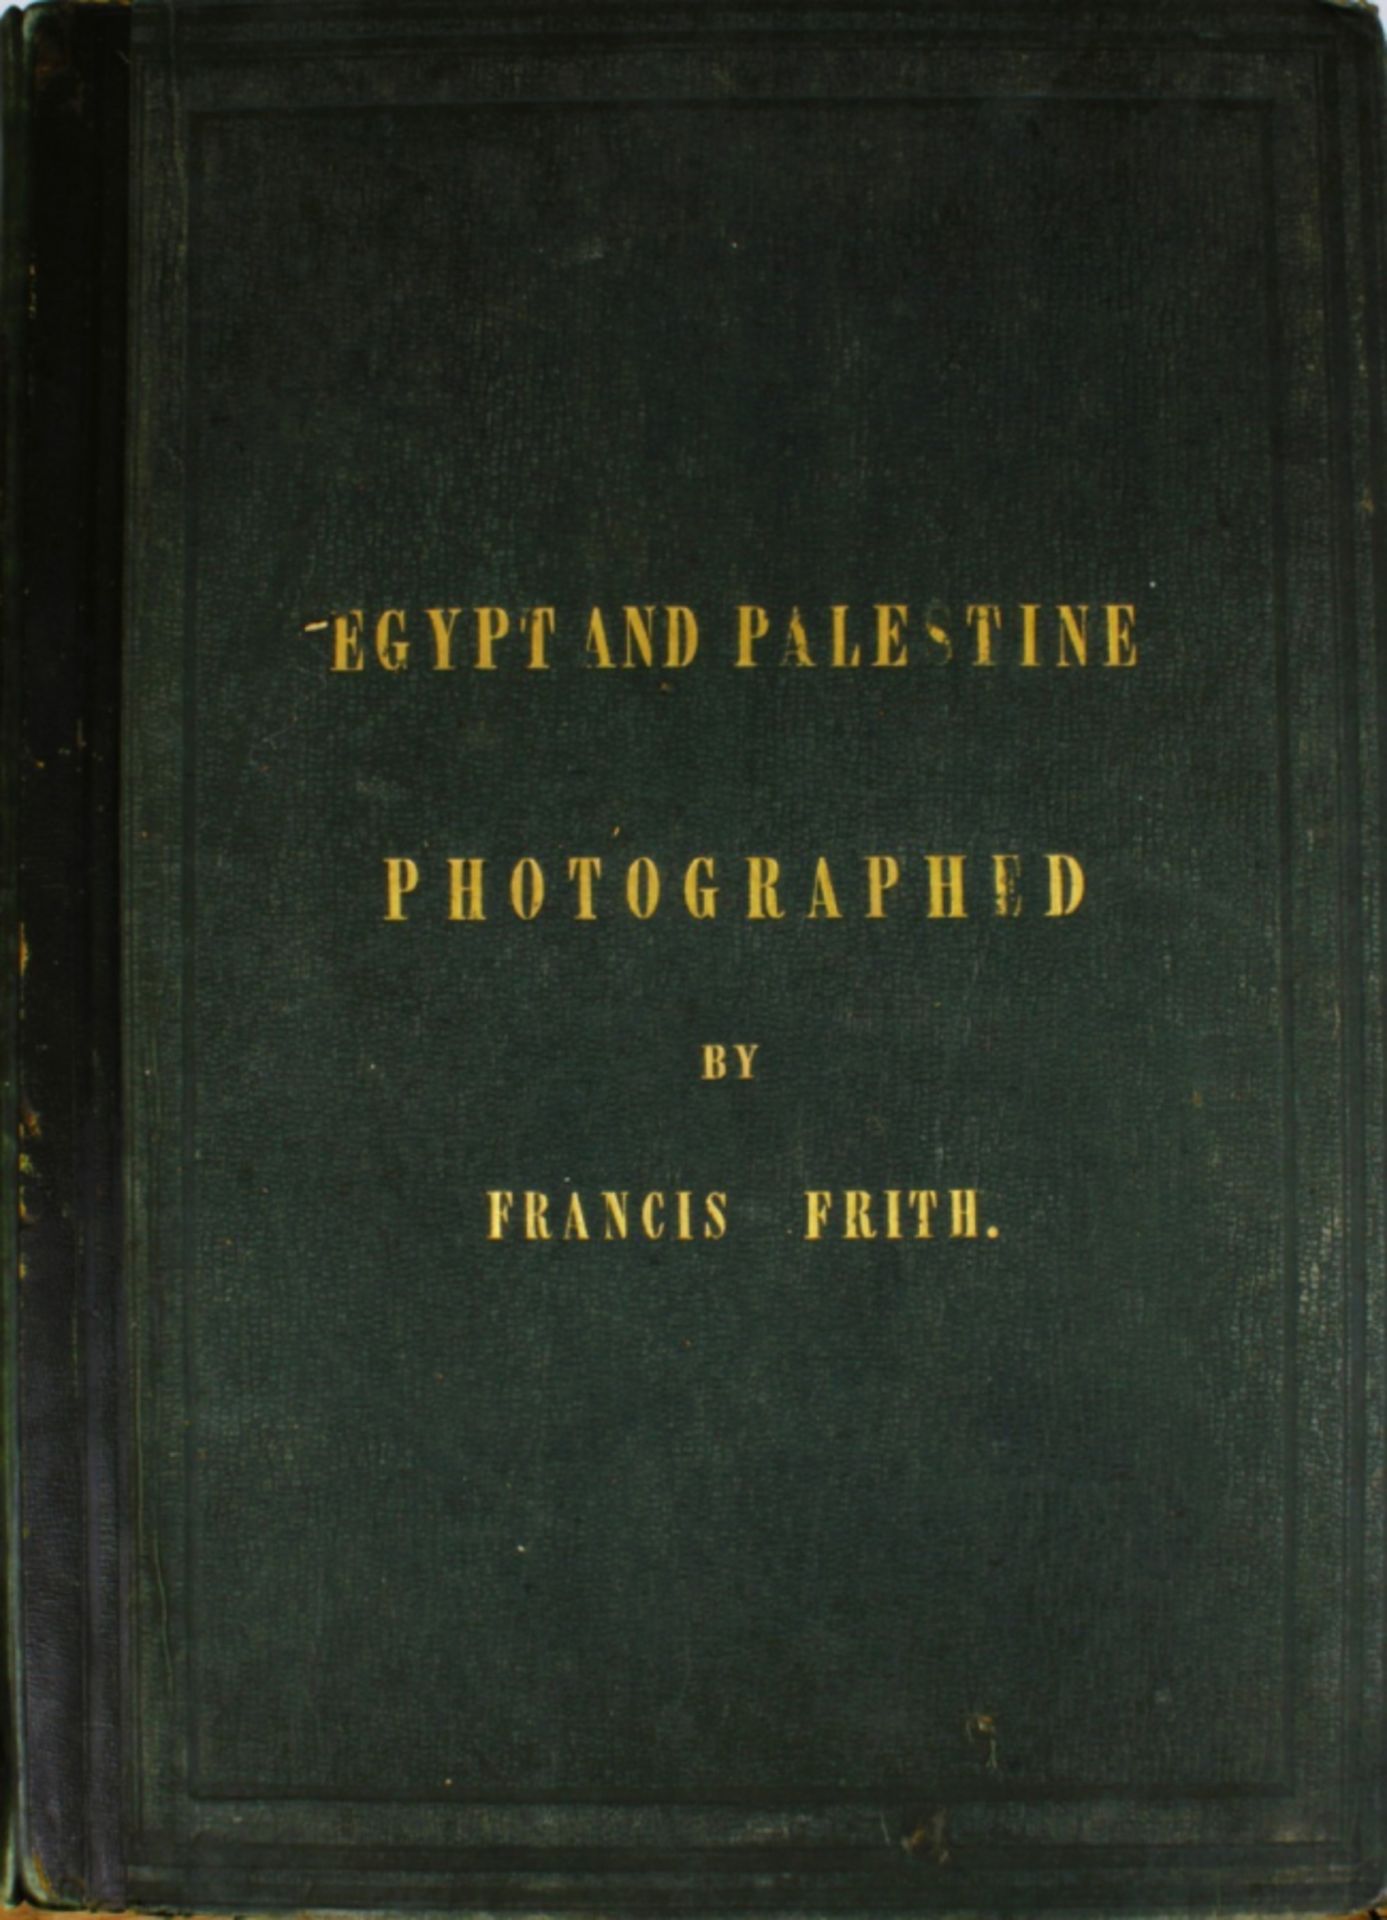 Book of photographs of Egypt and Palestine by Francis Frith